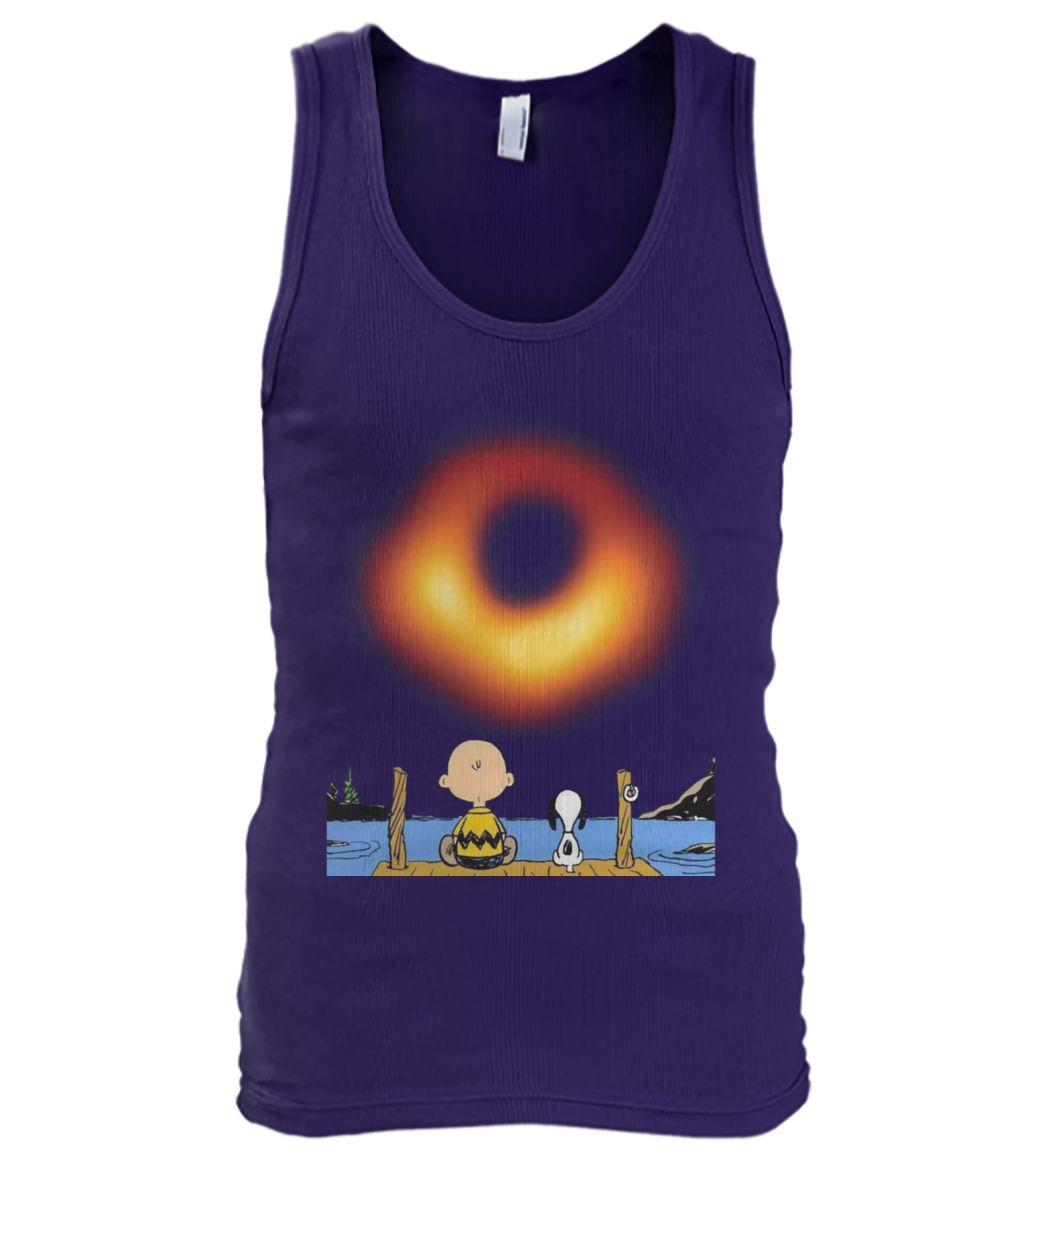 Snoopy and charlie brown black hole photo 2019 men's tank top